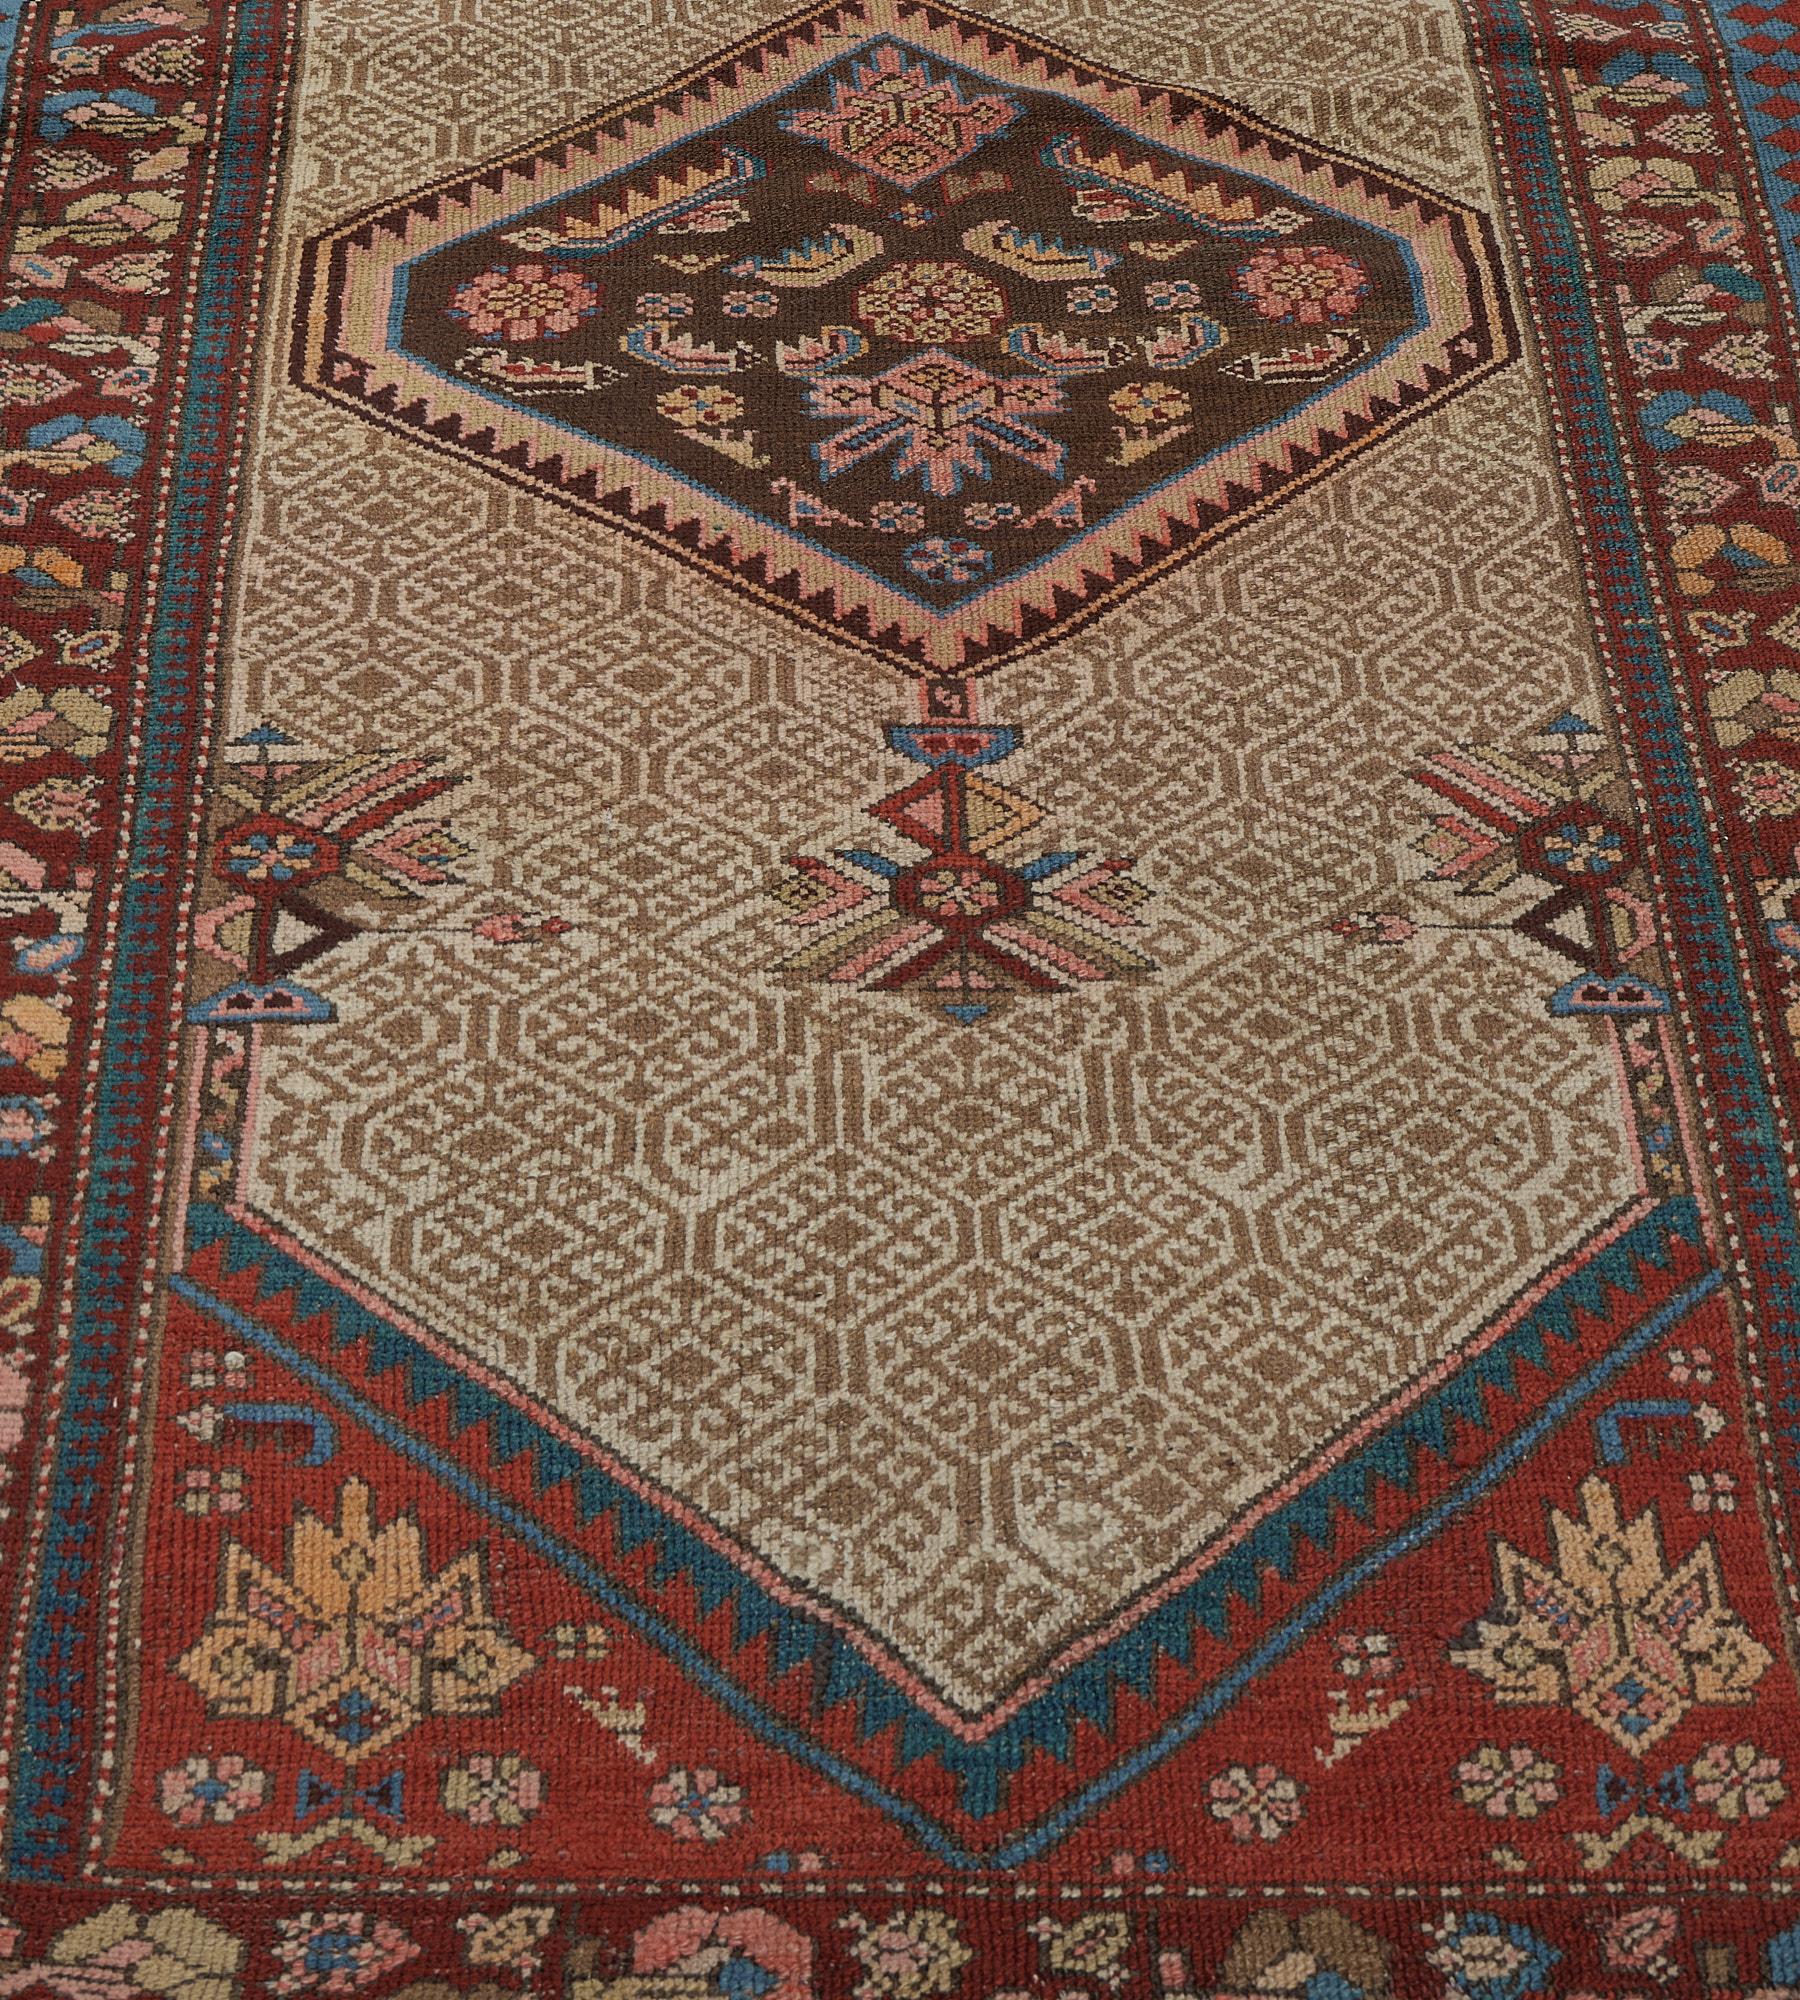 This antique Serab runner has a camel-brown field with a diagonal rows of buff-brown linked lattice enclosing a central small lozenge issuing hooked vine around a central chocolate-brown lozenge medallion containing angular serrated leaves and